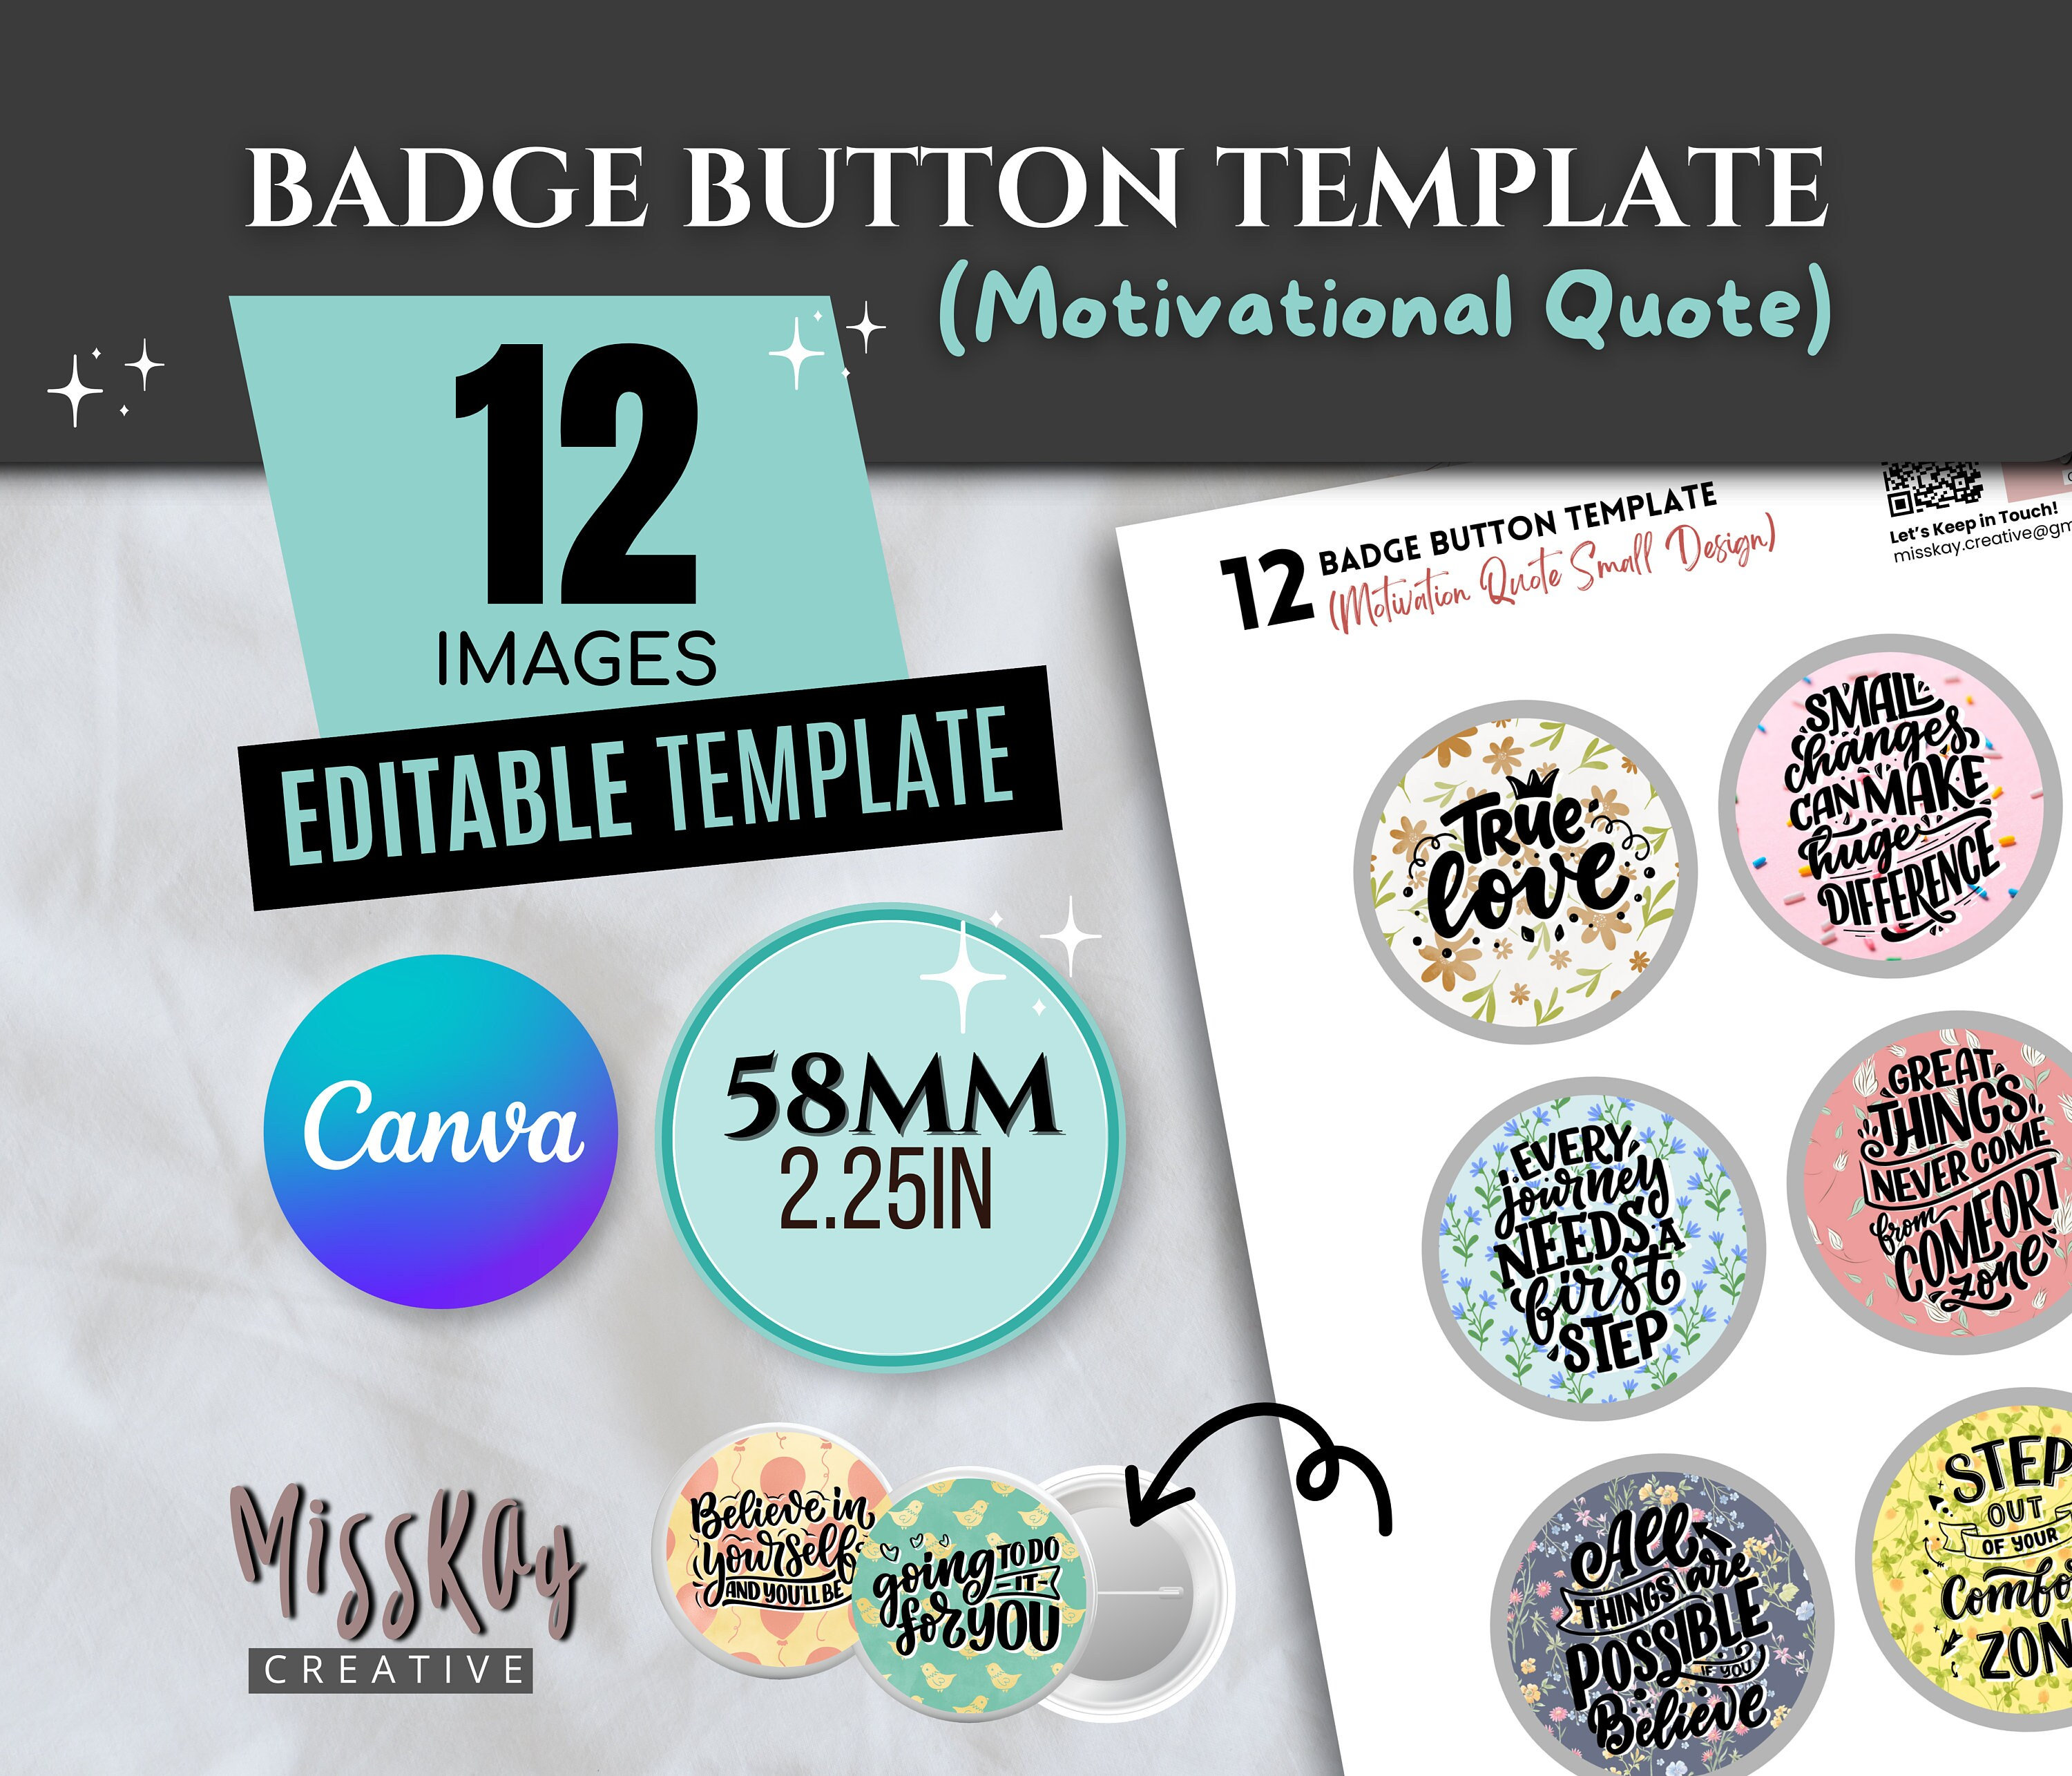 12 Editable Badge Button Pinback Motivational Quote Small Colorful Design  Cute Cartoon Illustration Canva Template 58mm 2.25 Inch Buttons 